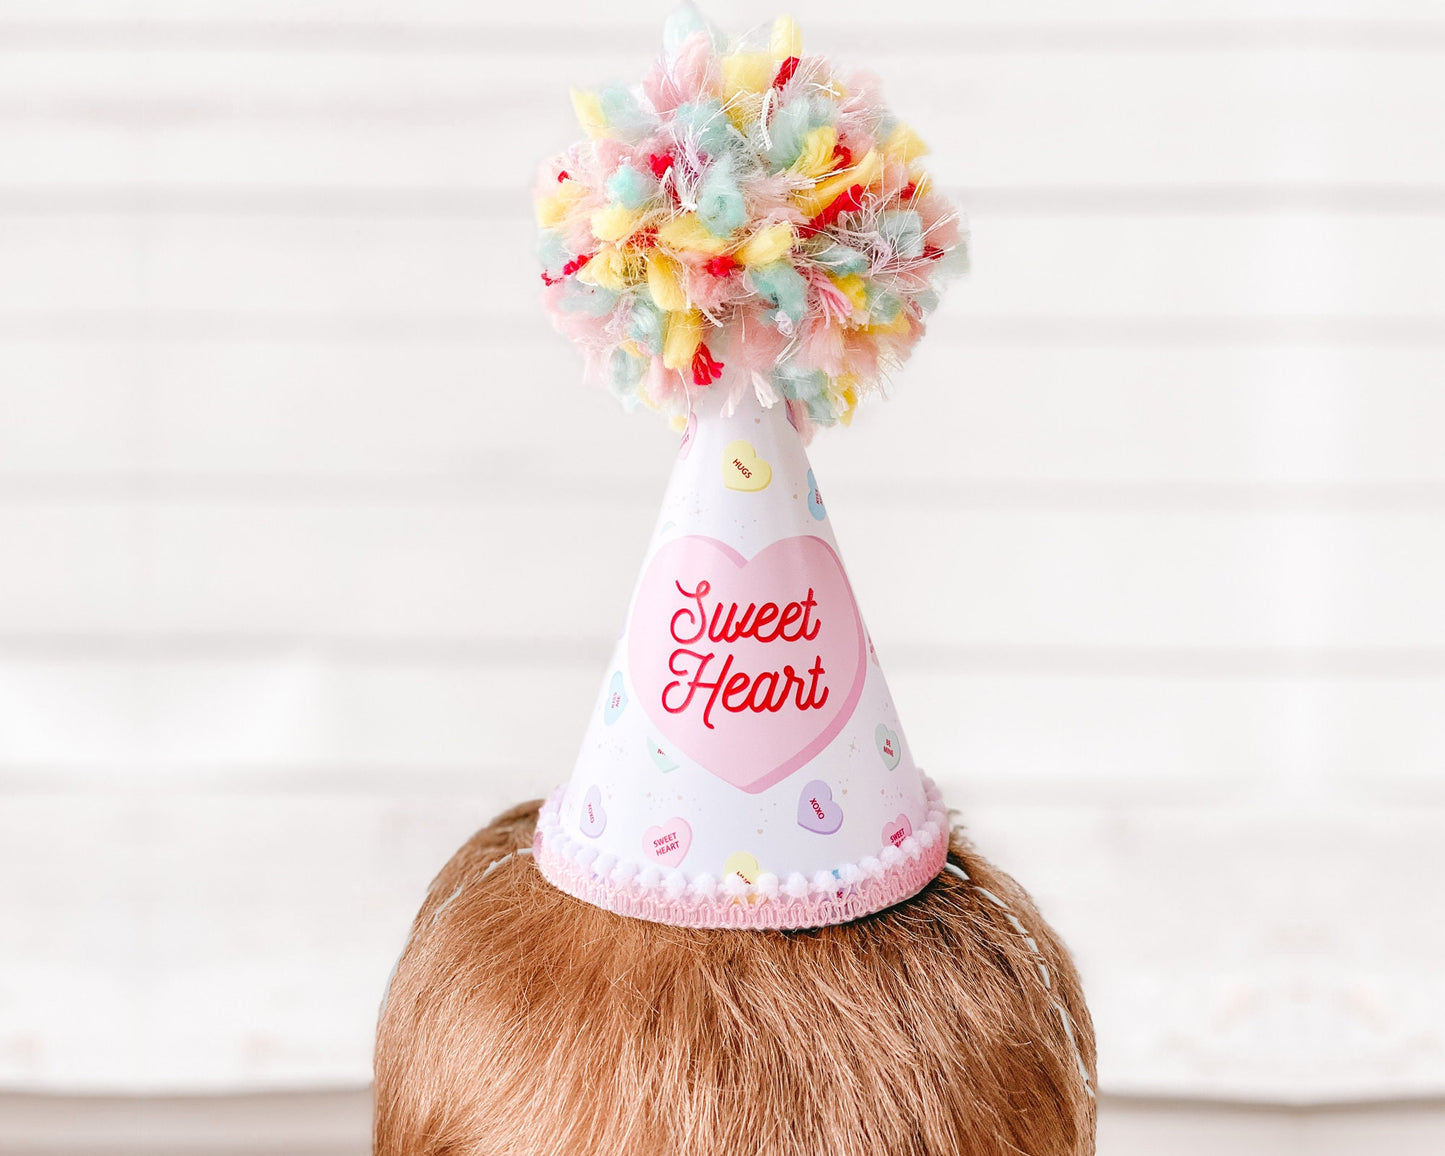 Conversation Hearts Valentine's Day Party Hats || Sweetheart and Be Mine || Printable Valentine's Day Party Decor || Galentine's Day || VD03